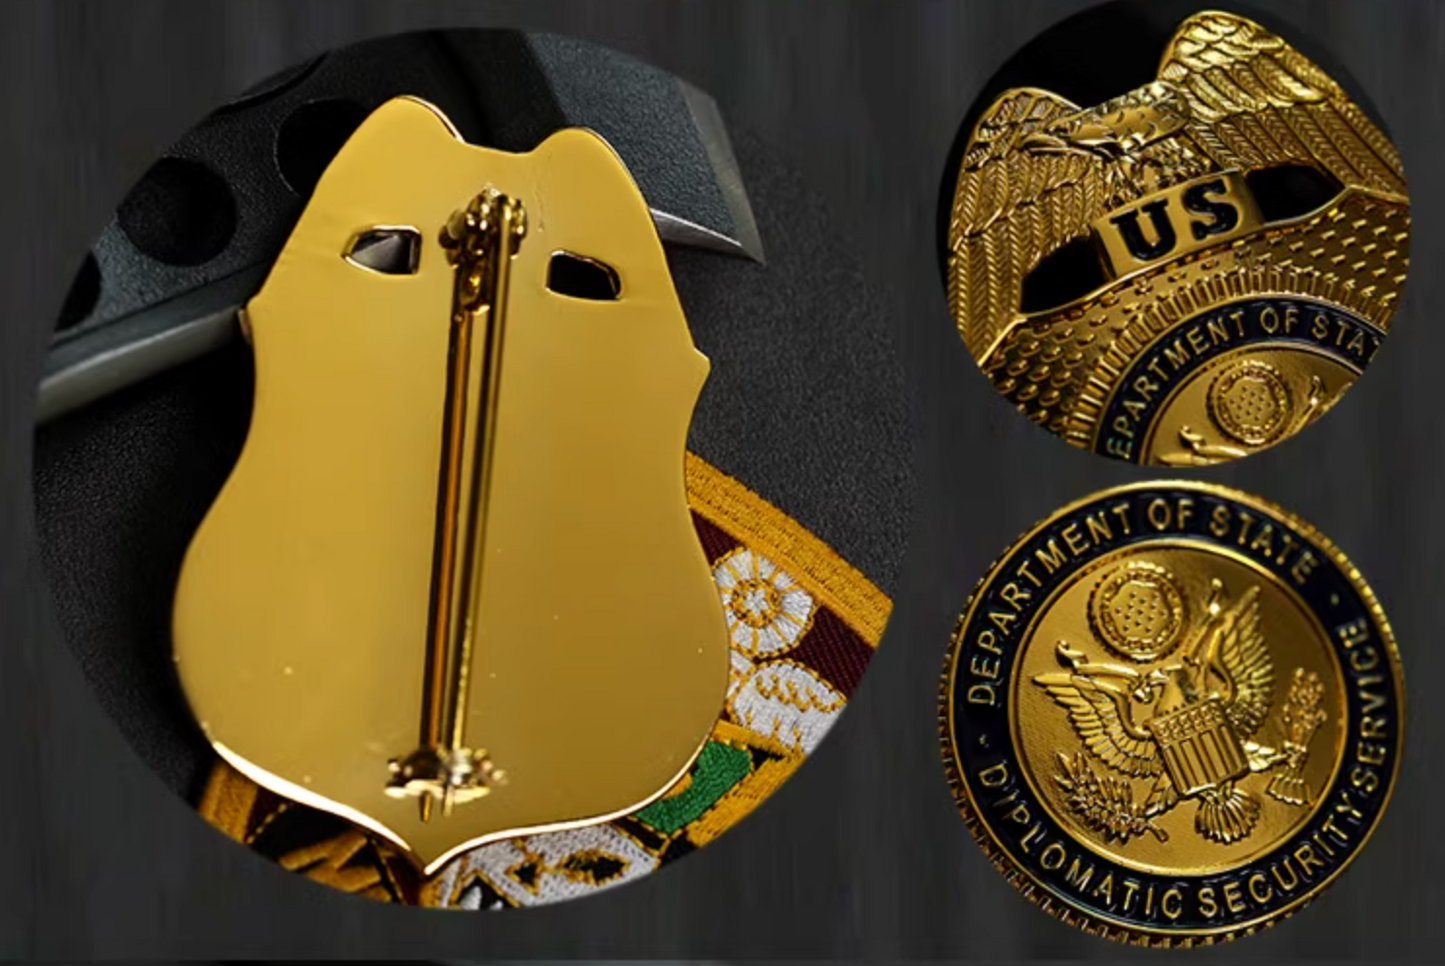 U.S. Diplomatic Security Service Special Agent BADGE